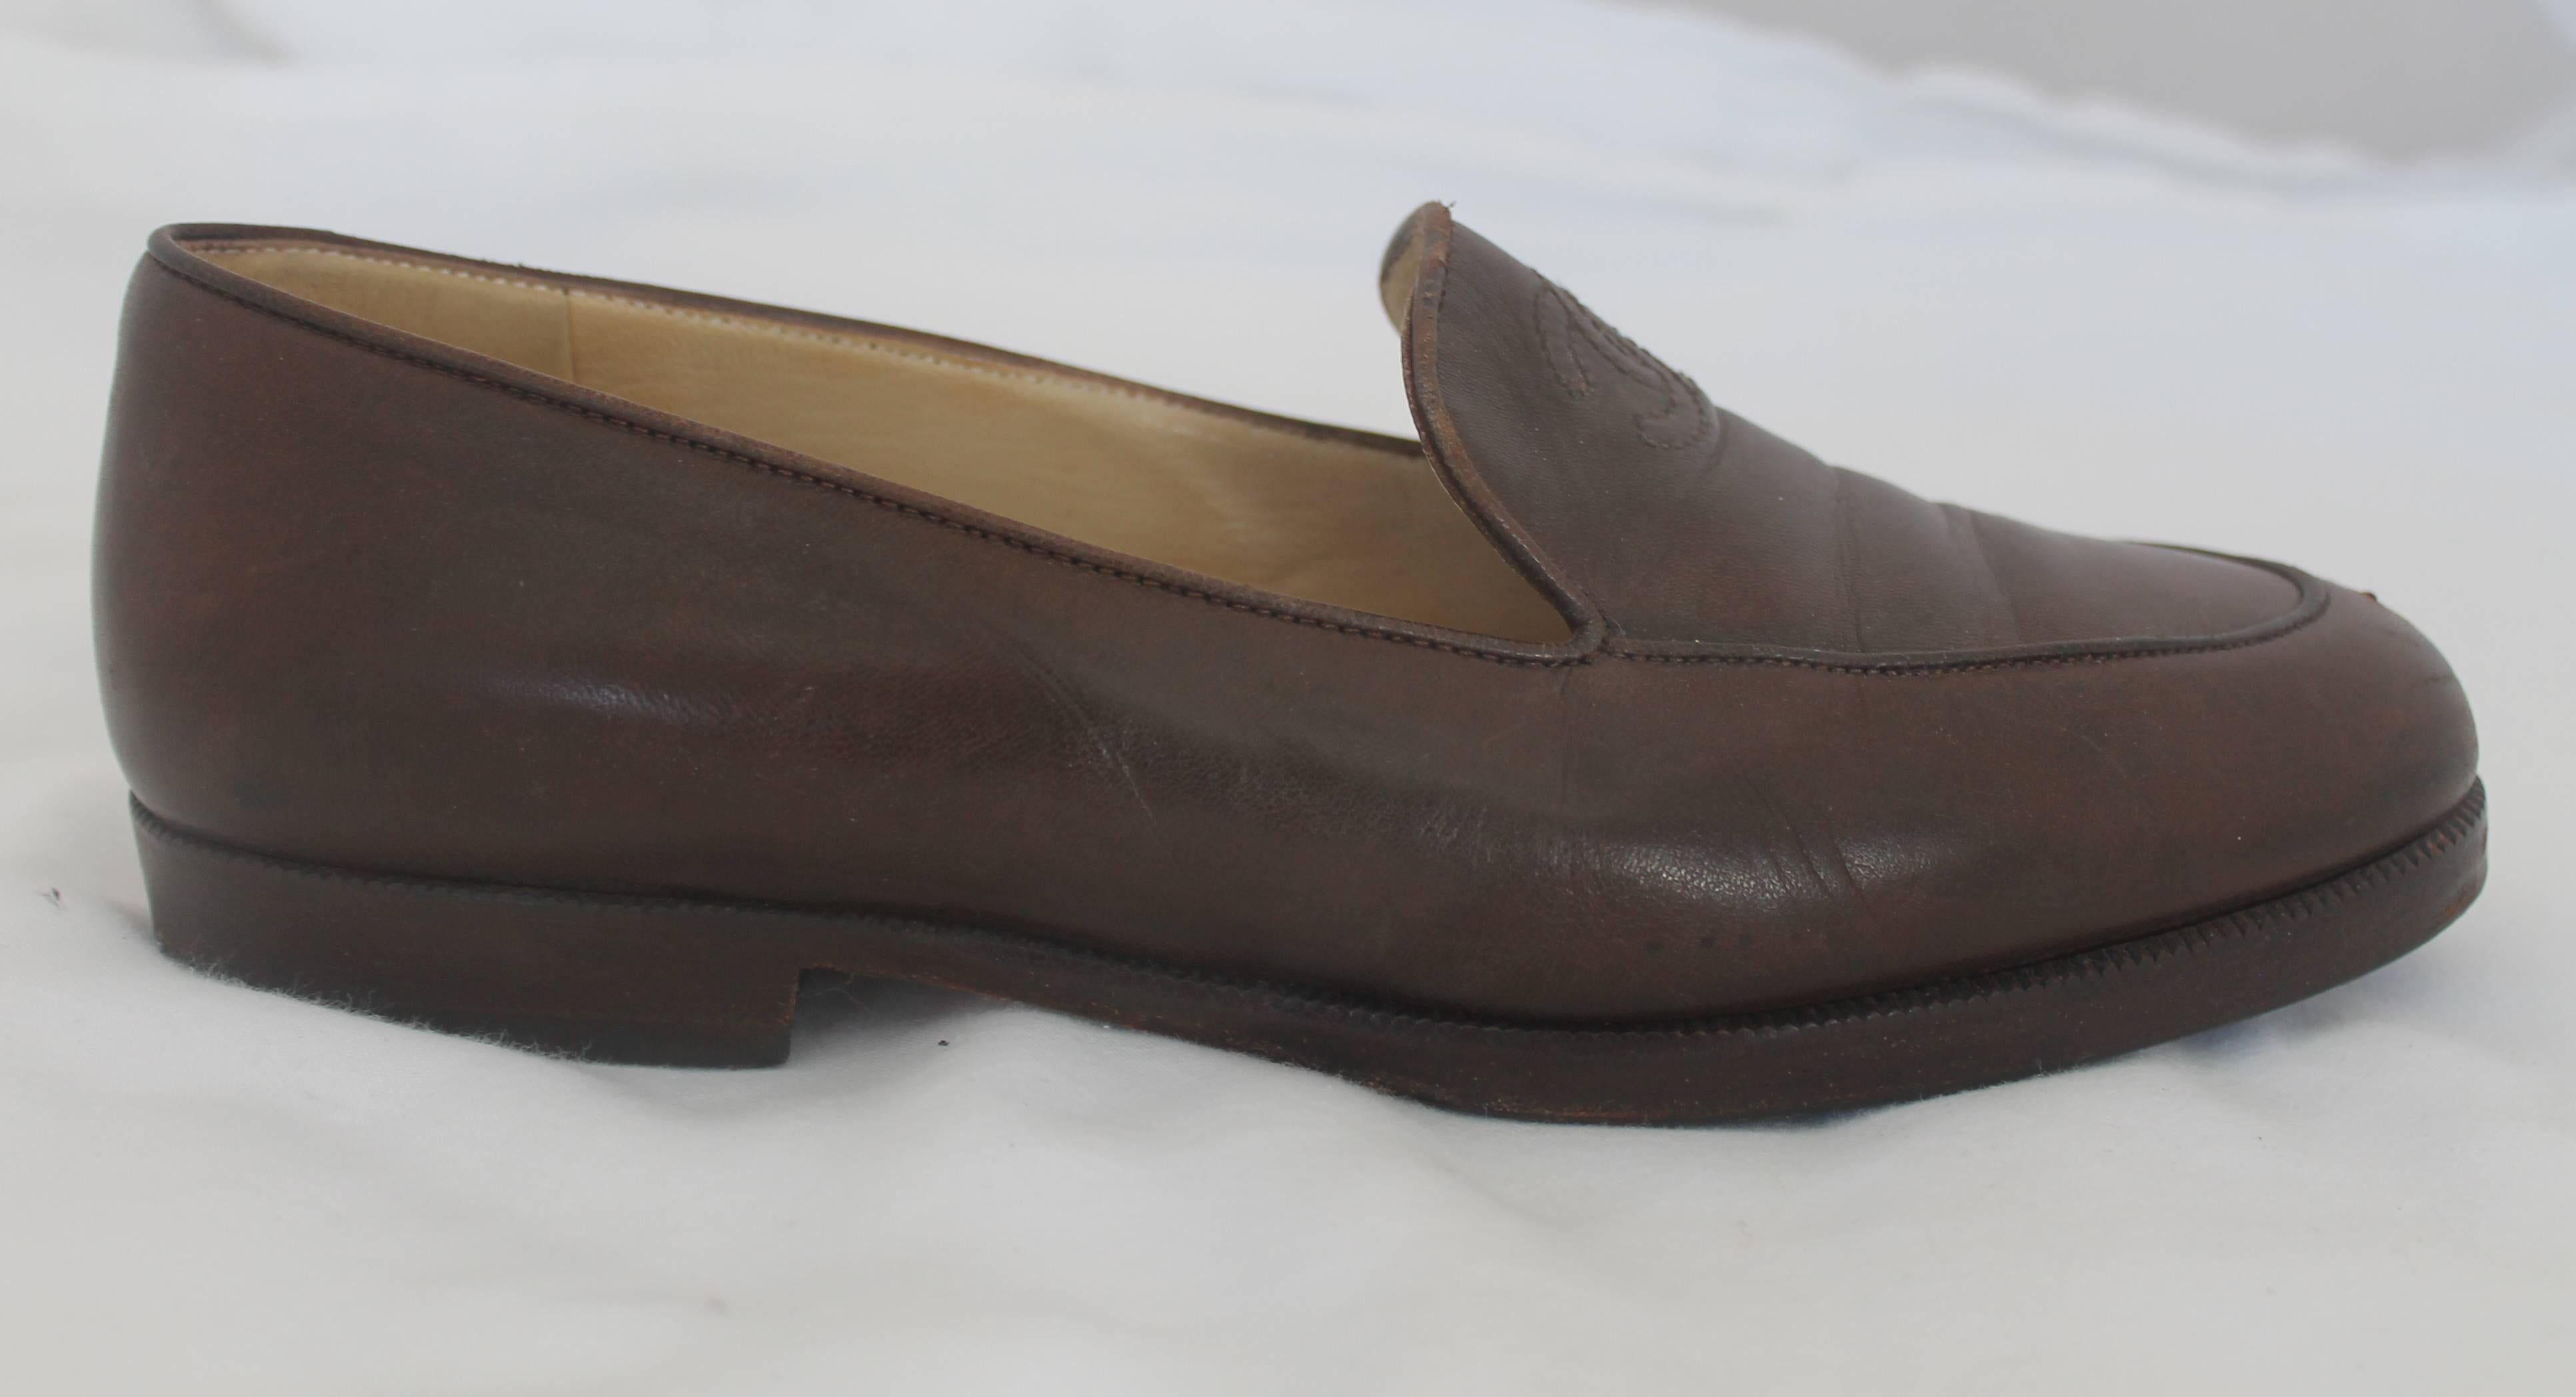 Chanel Brown Leather Loafers - 37. These brown loafers are made of leather and have the Chanel logo stitched into the top of the shoe. They are in good condition with minor wear on the inside and bottom. The front of each shoe show some